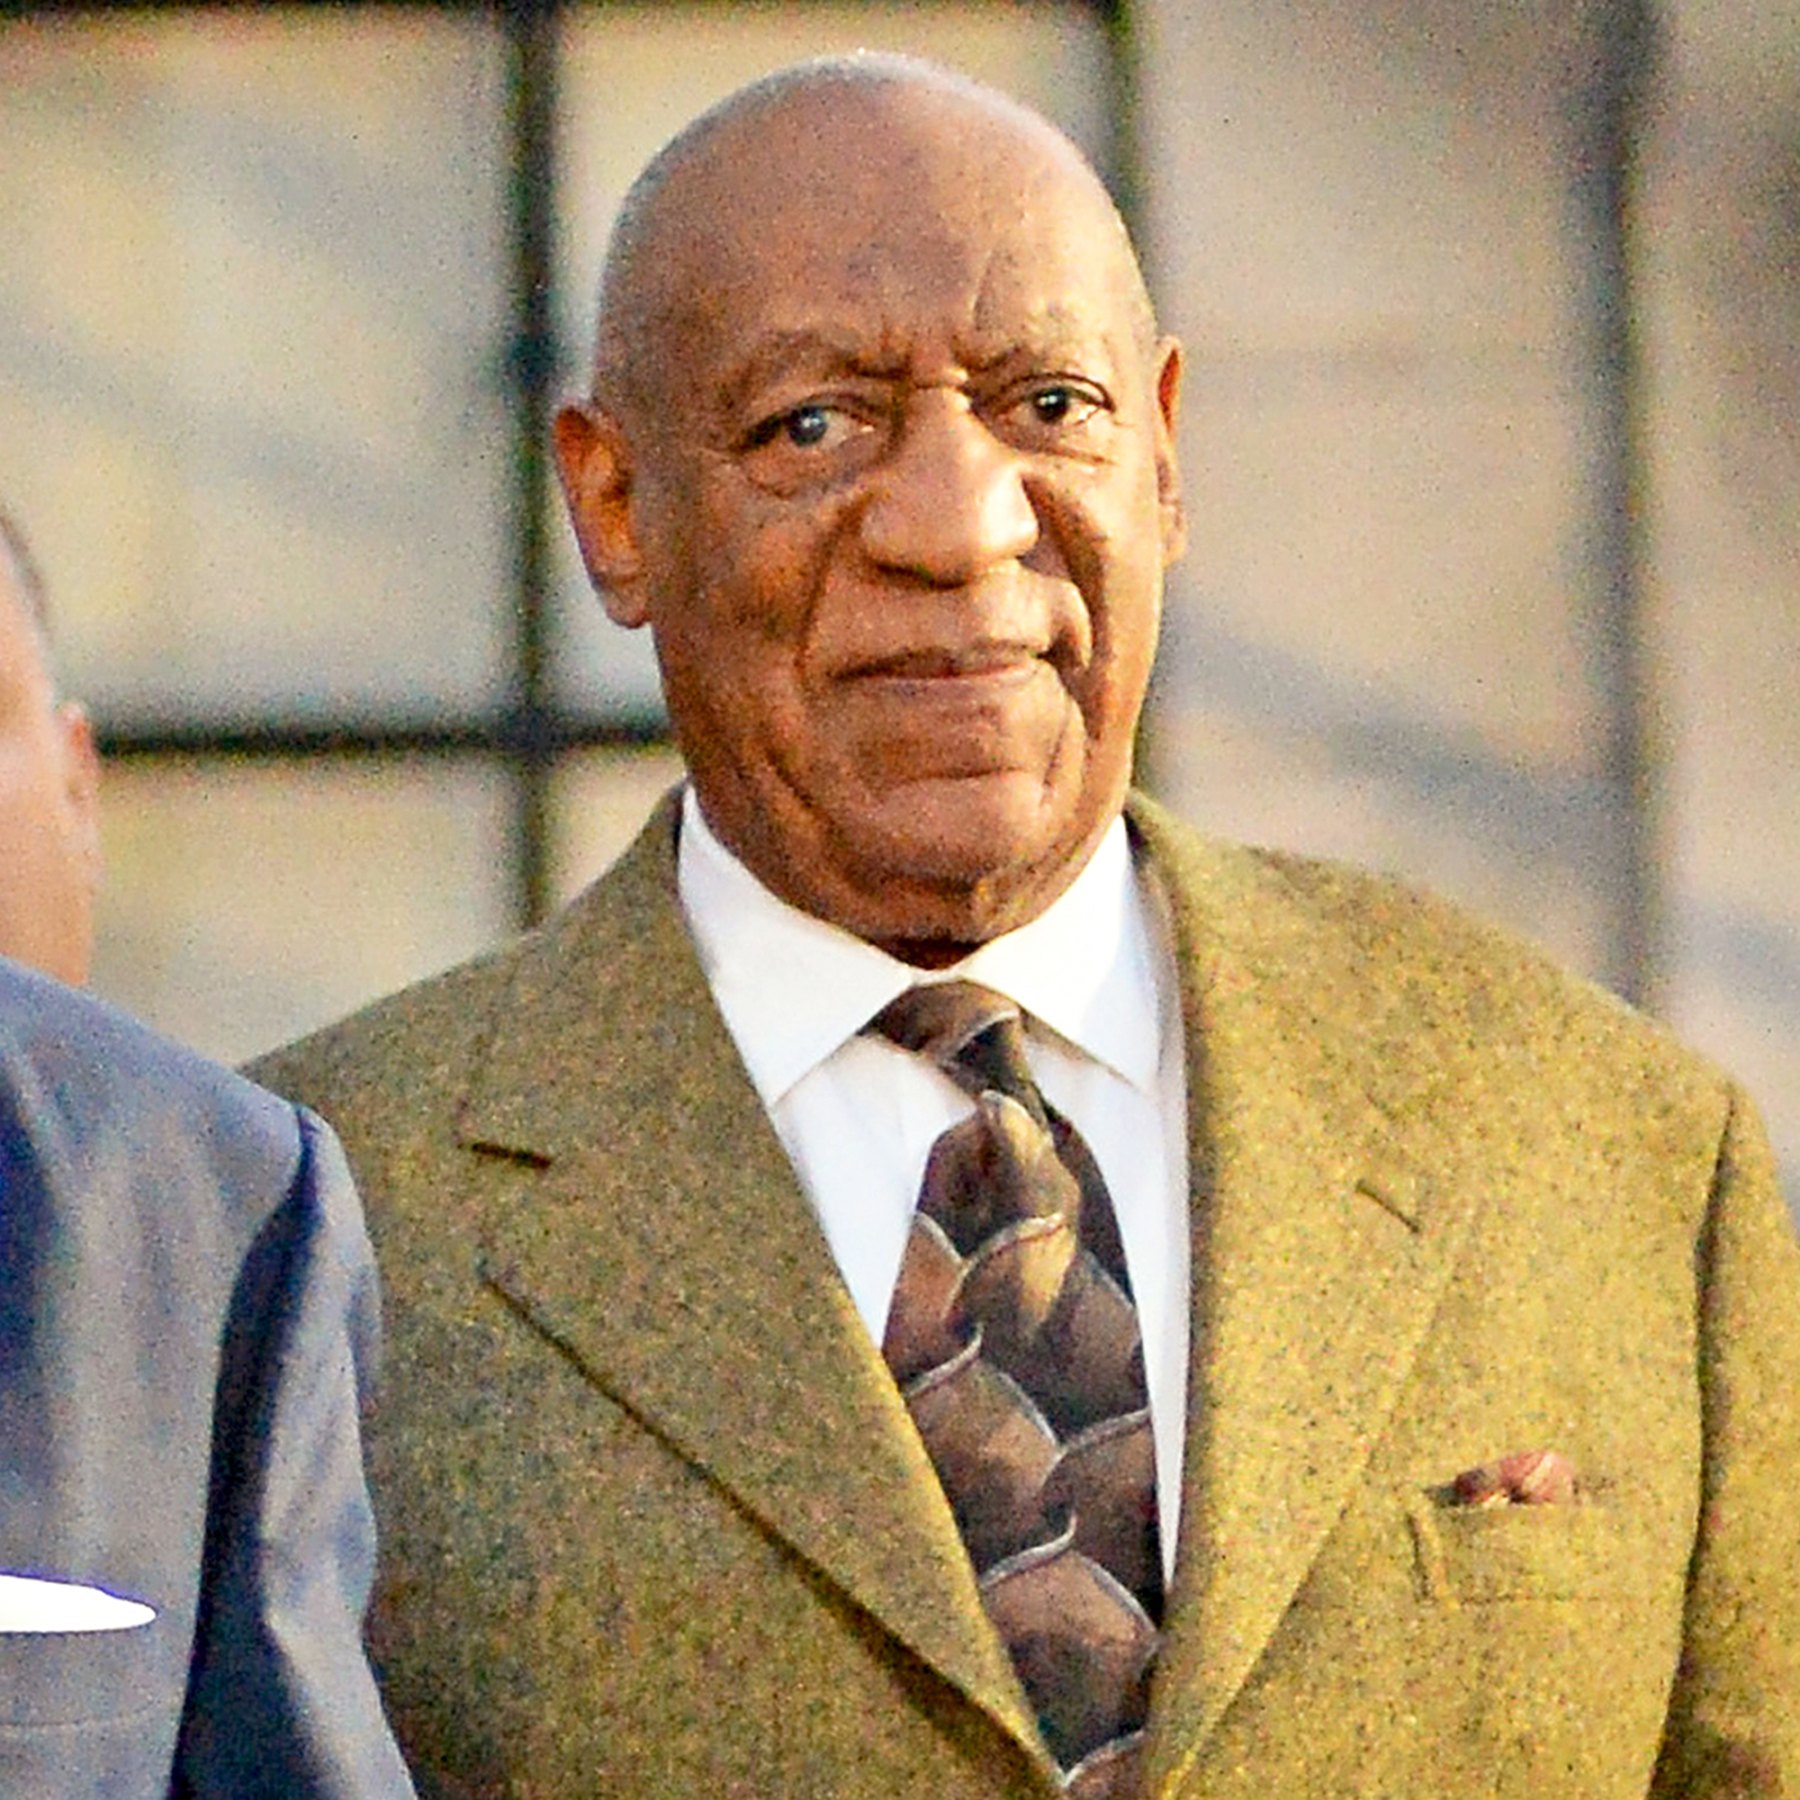 'Bill Cosby An American Scandal’ See the First Look at the TV Special